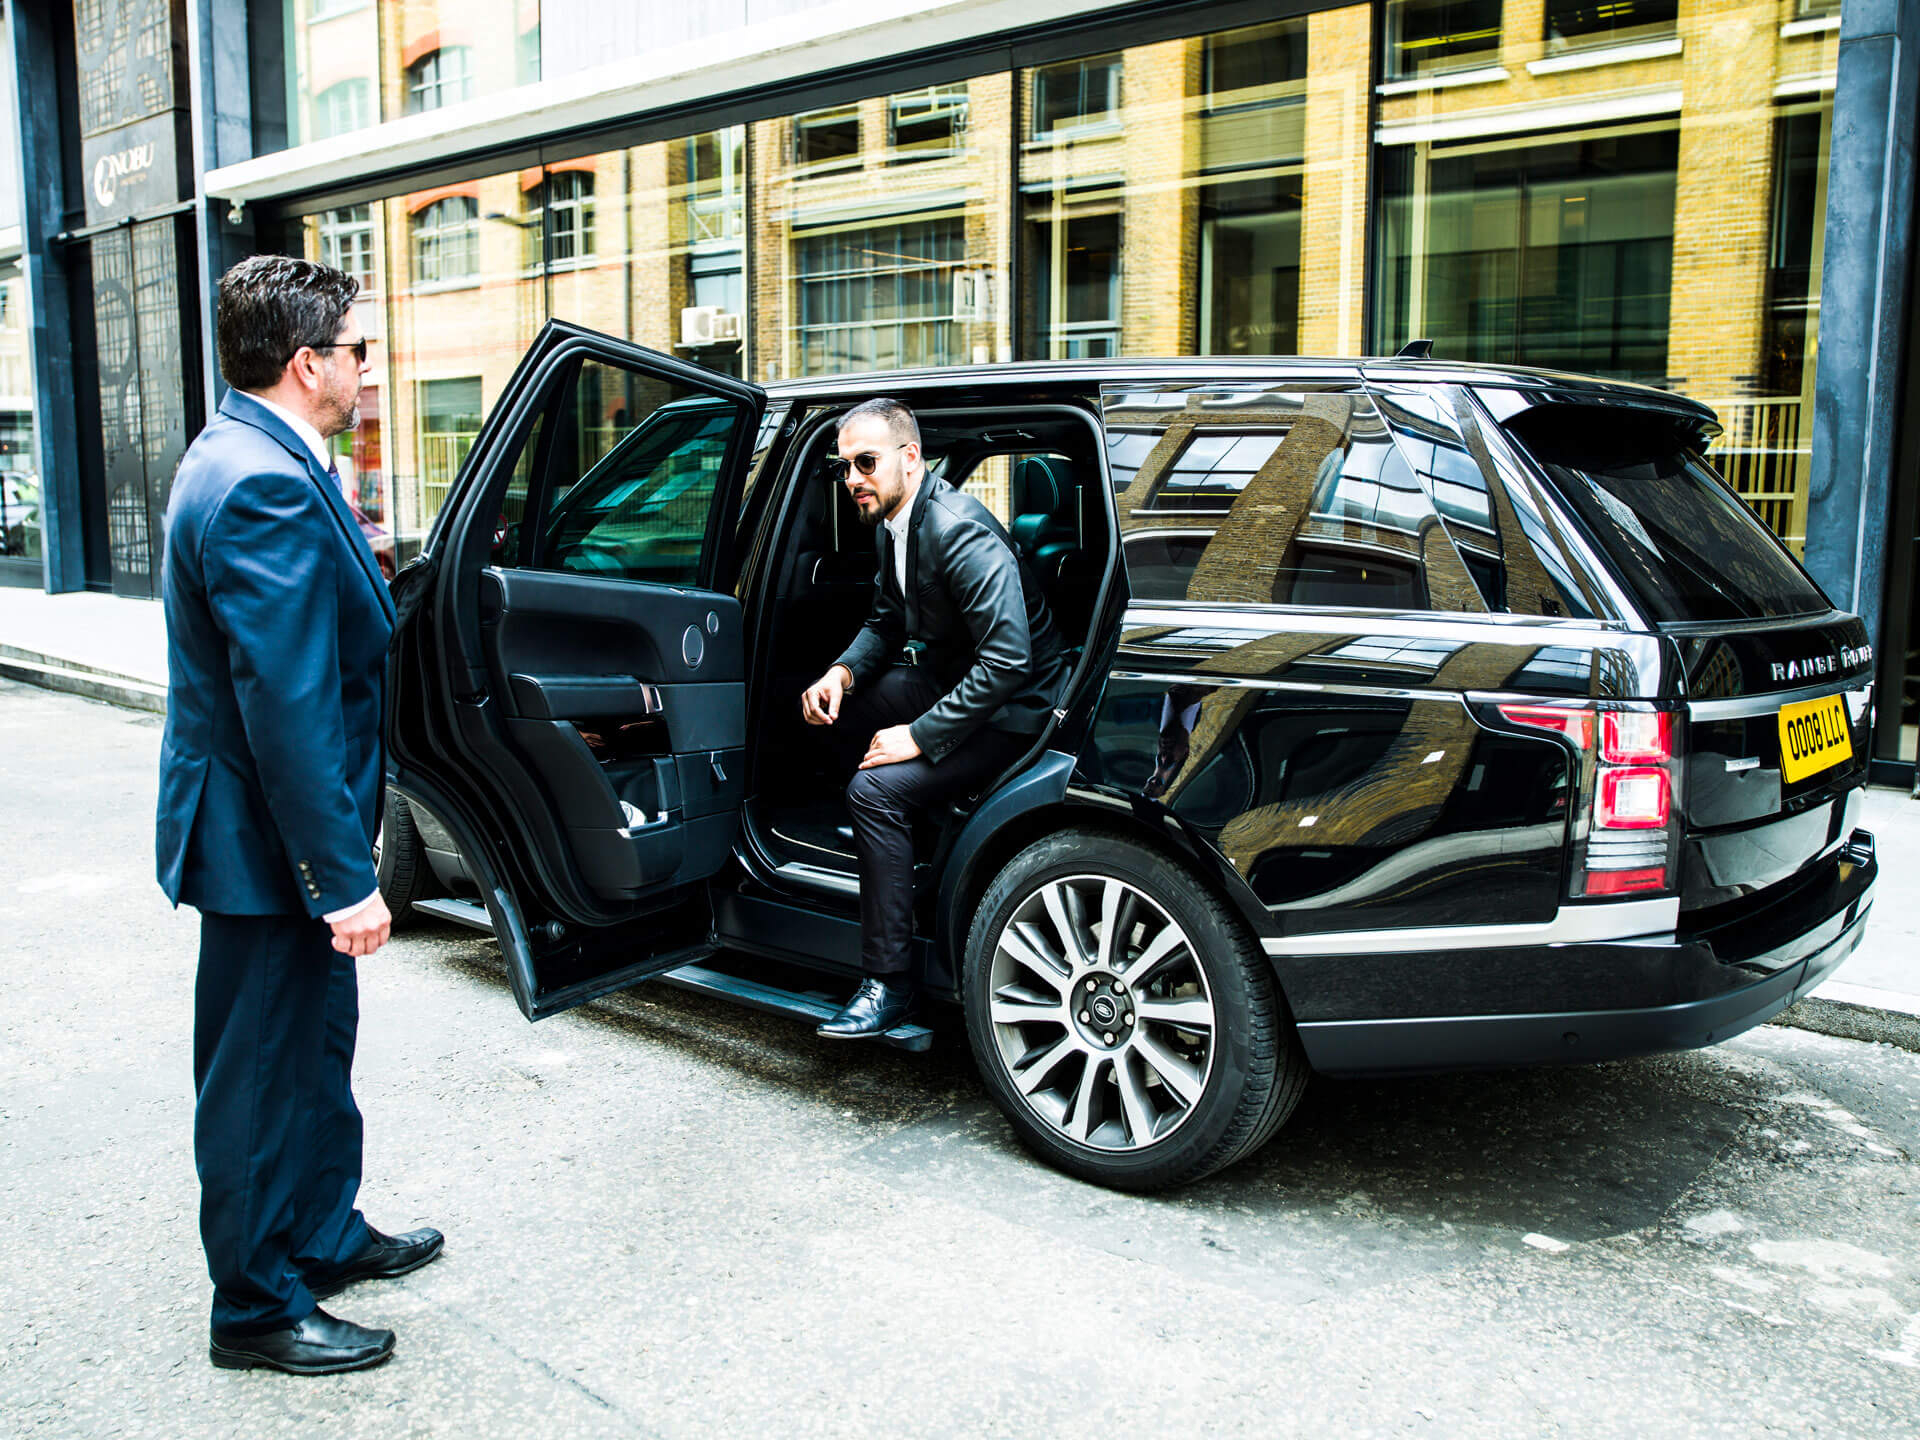 Hire A Range Rover Chauffeur For A Day